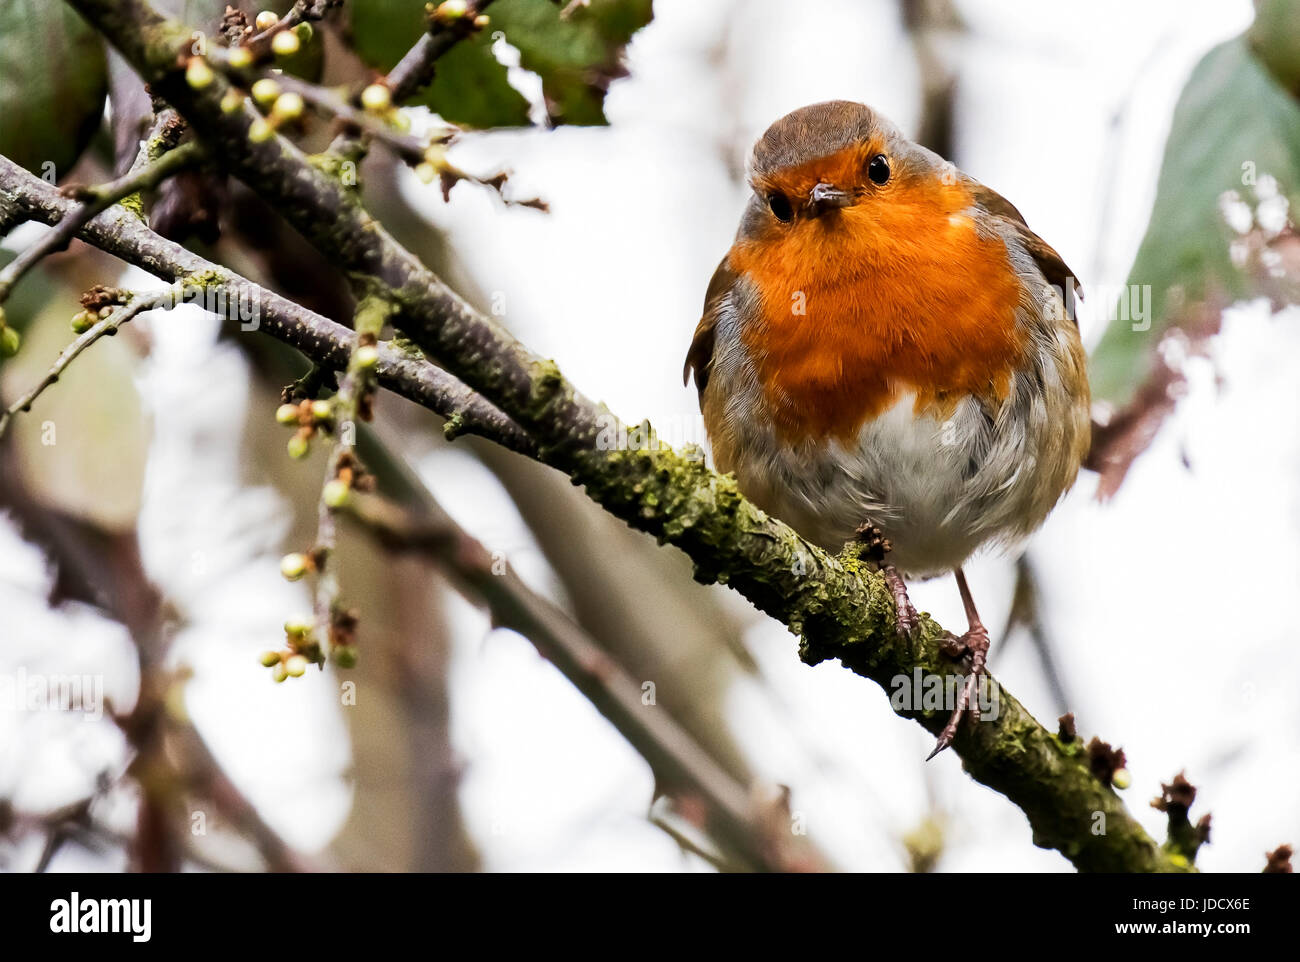 A Little Robin Redbreast Watching me from a branch Stock Photo